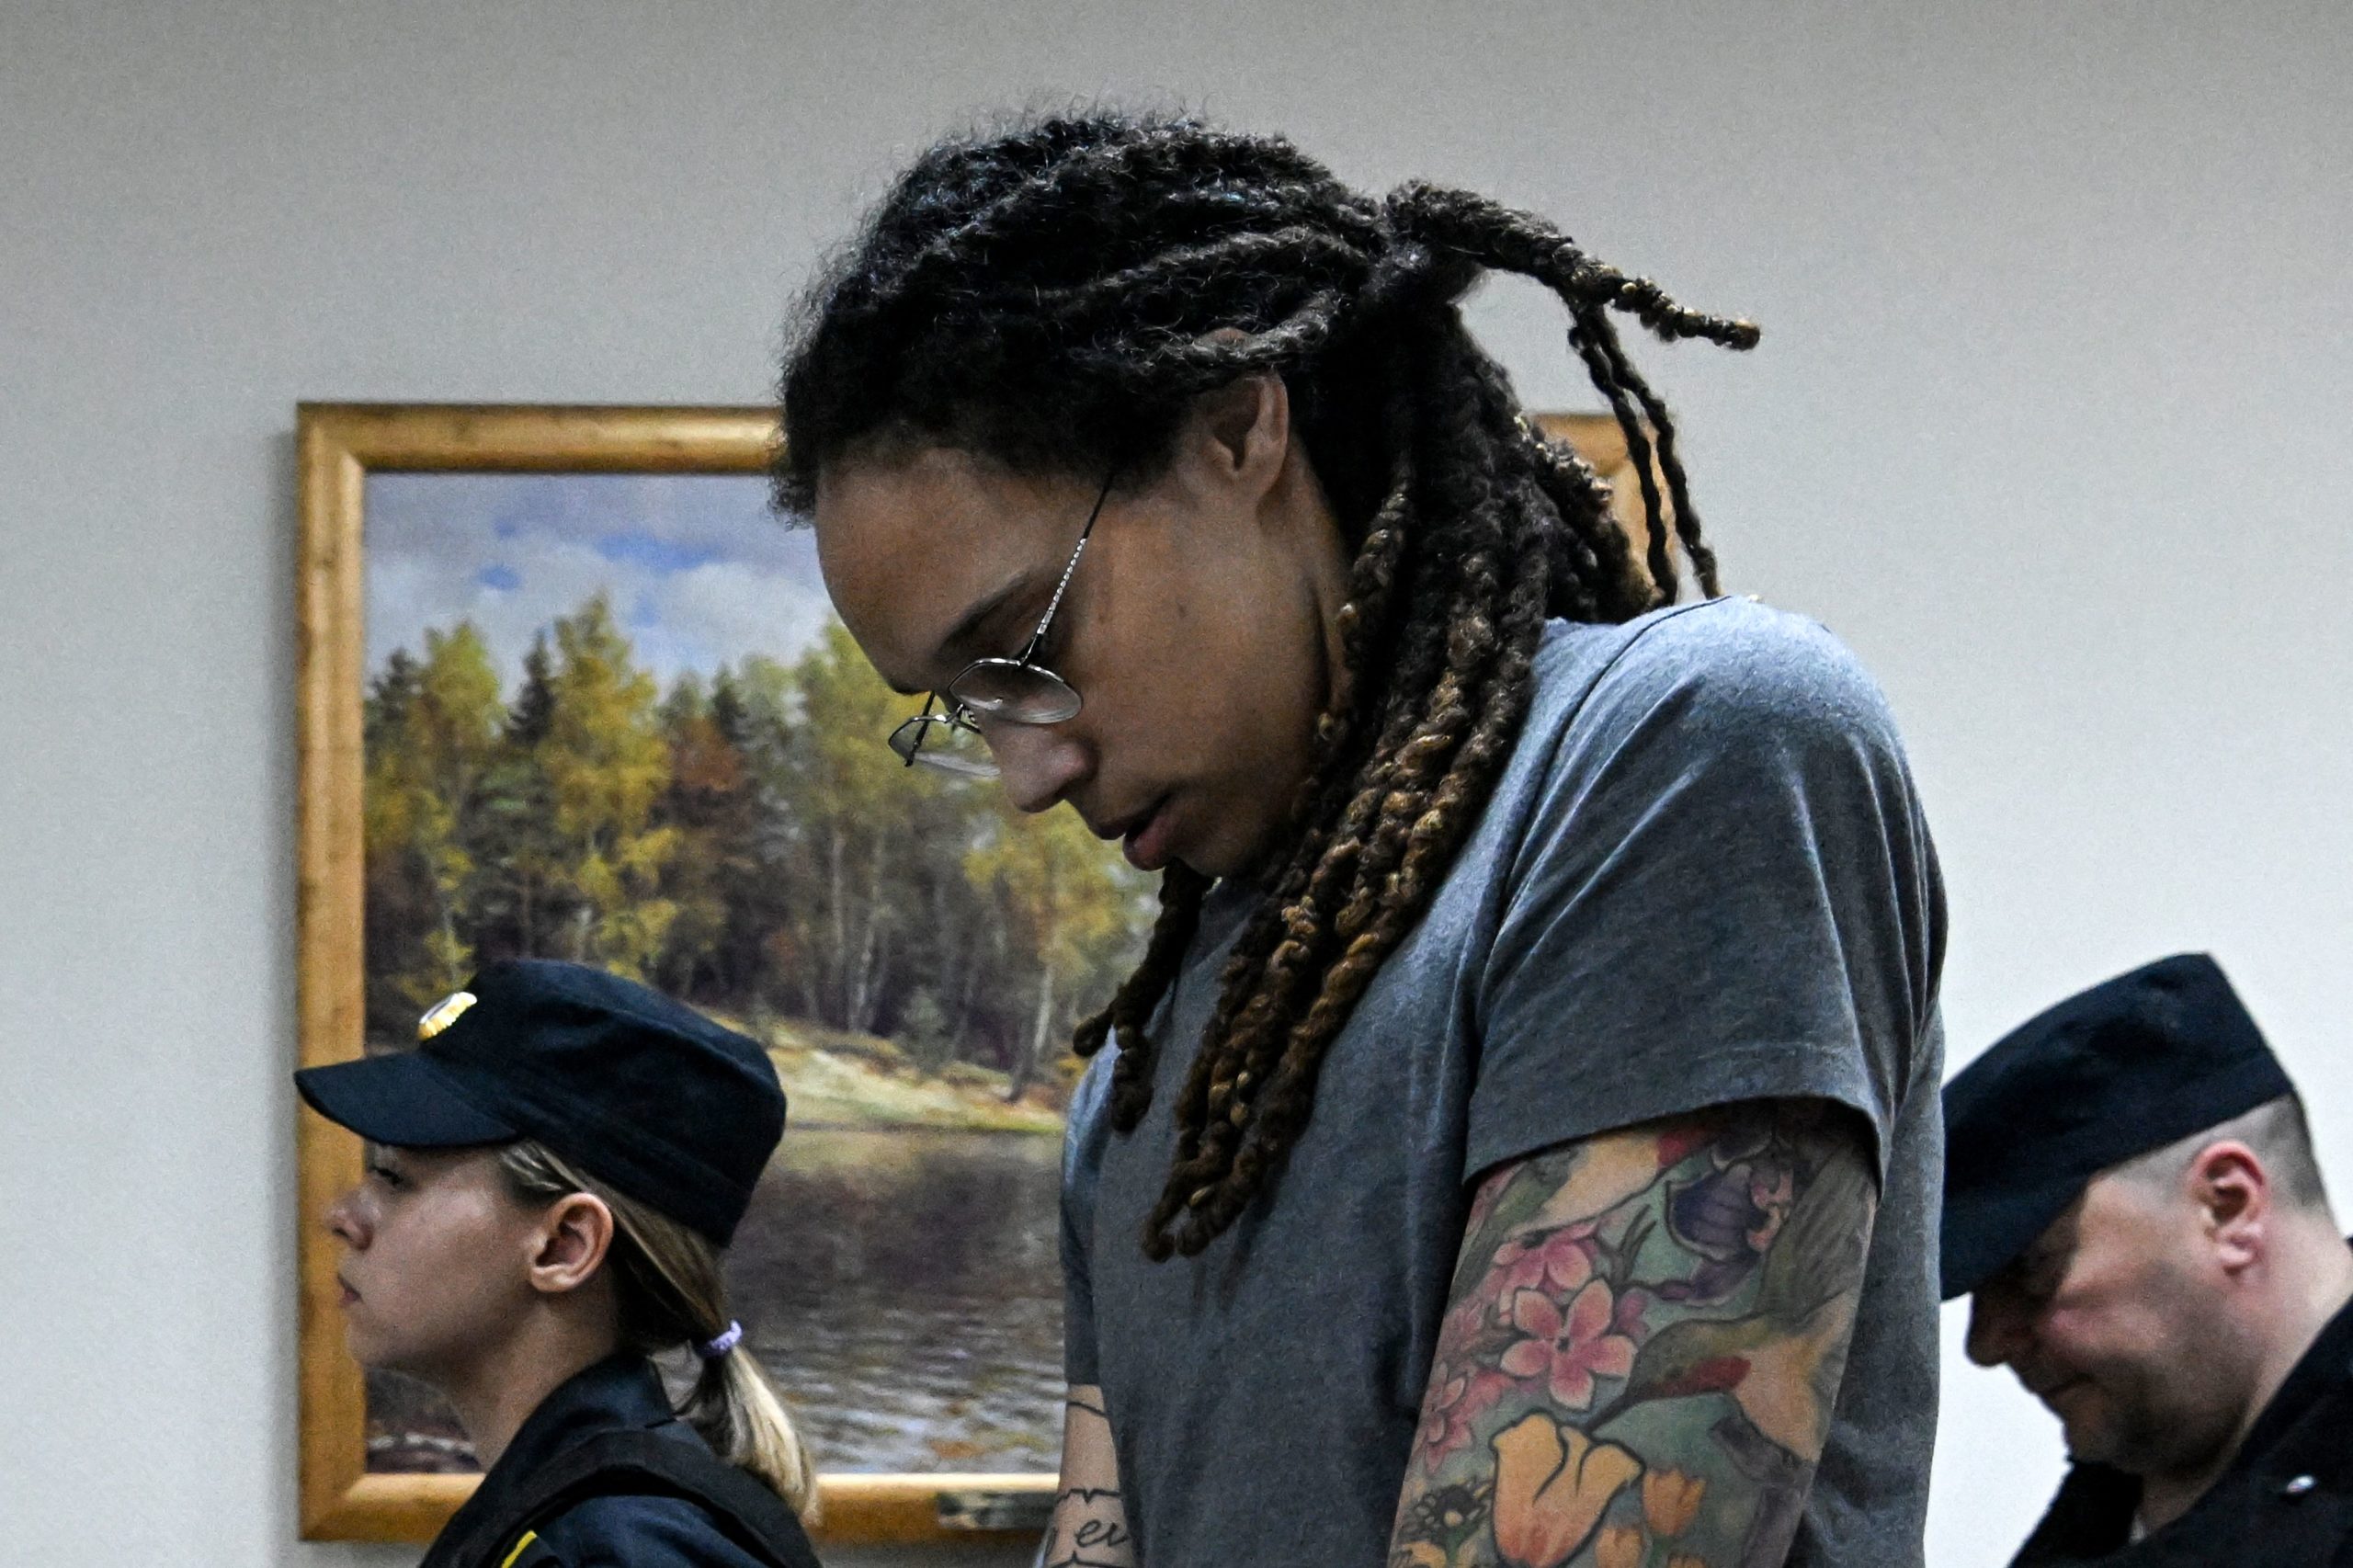 US Women's National Basketball Association (WNBA) basketball player Brittney Griner, who was detained at Moscow's Sheremetyevo airport and later charged with illegal possession of cannabis, leaves the courtroom after the court's verdict in Khimki outside Moscow, on August 4, 2022. - A Russian court found Griner guilty of smuggling and storing narcotics after prosecutors requested a sentence of nine and a half years in jail for the athlete. KIRILL KUDRYAVTSEV/AFP via Getty Images